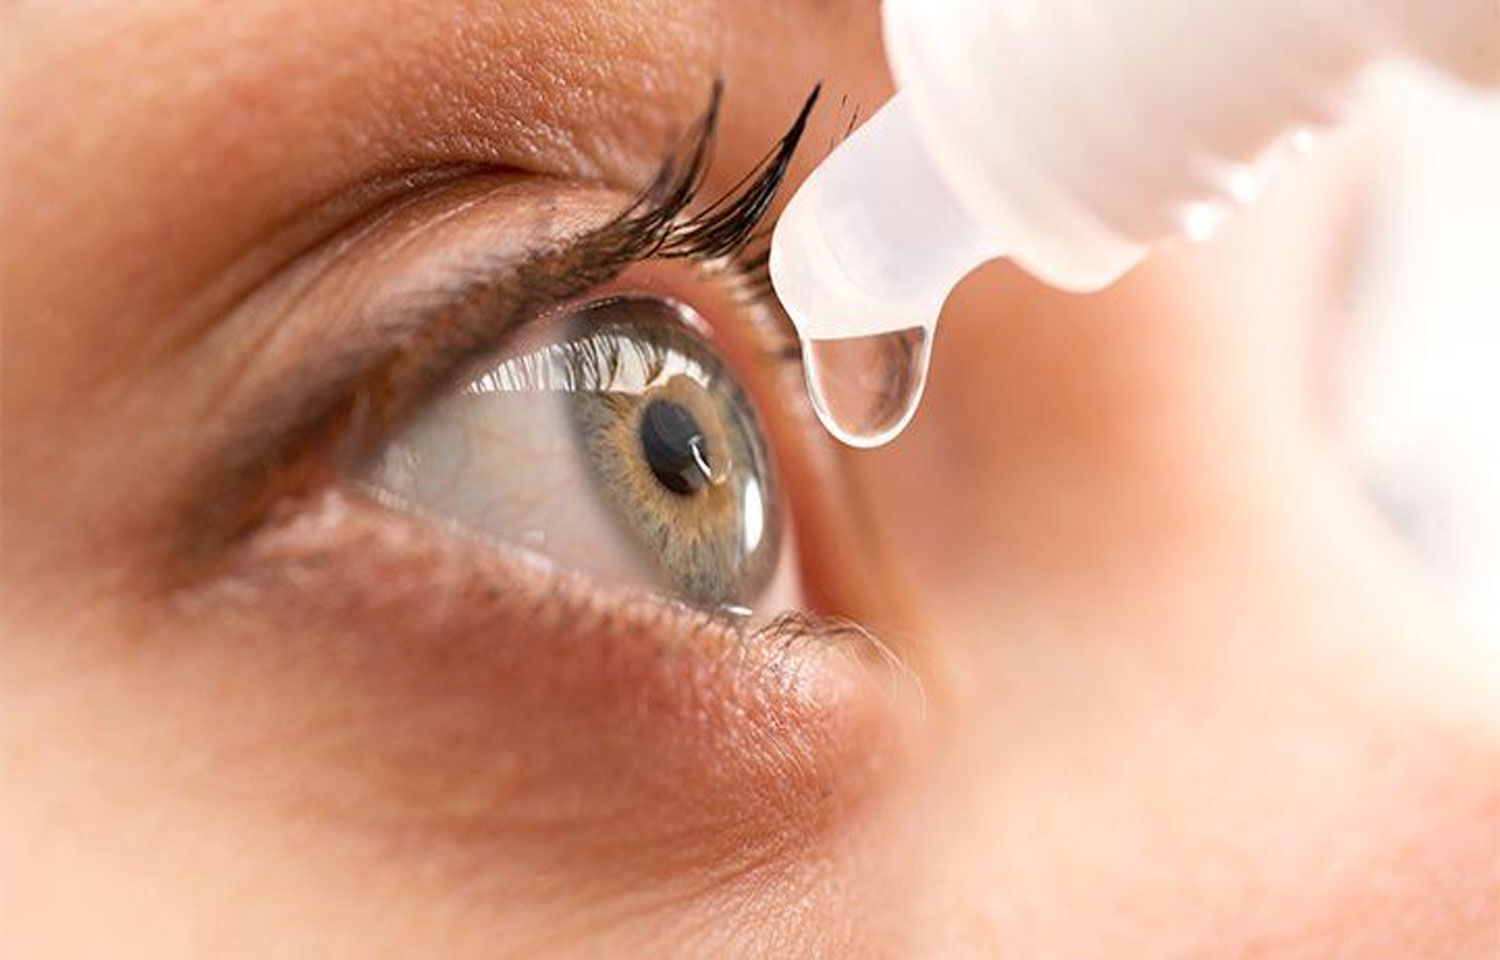 Netarsudil effectively lowers IOP of   glaucoma patients on maximally tolerated medical therapy: Study